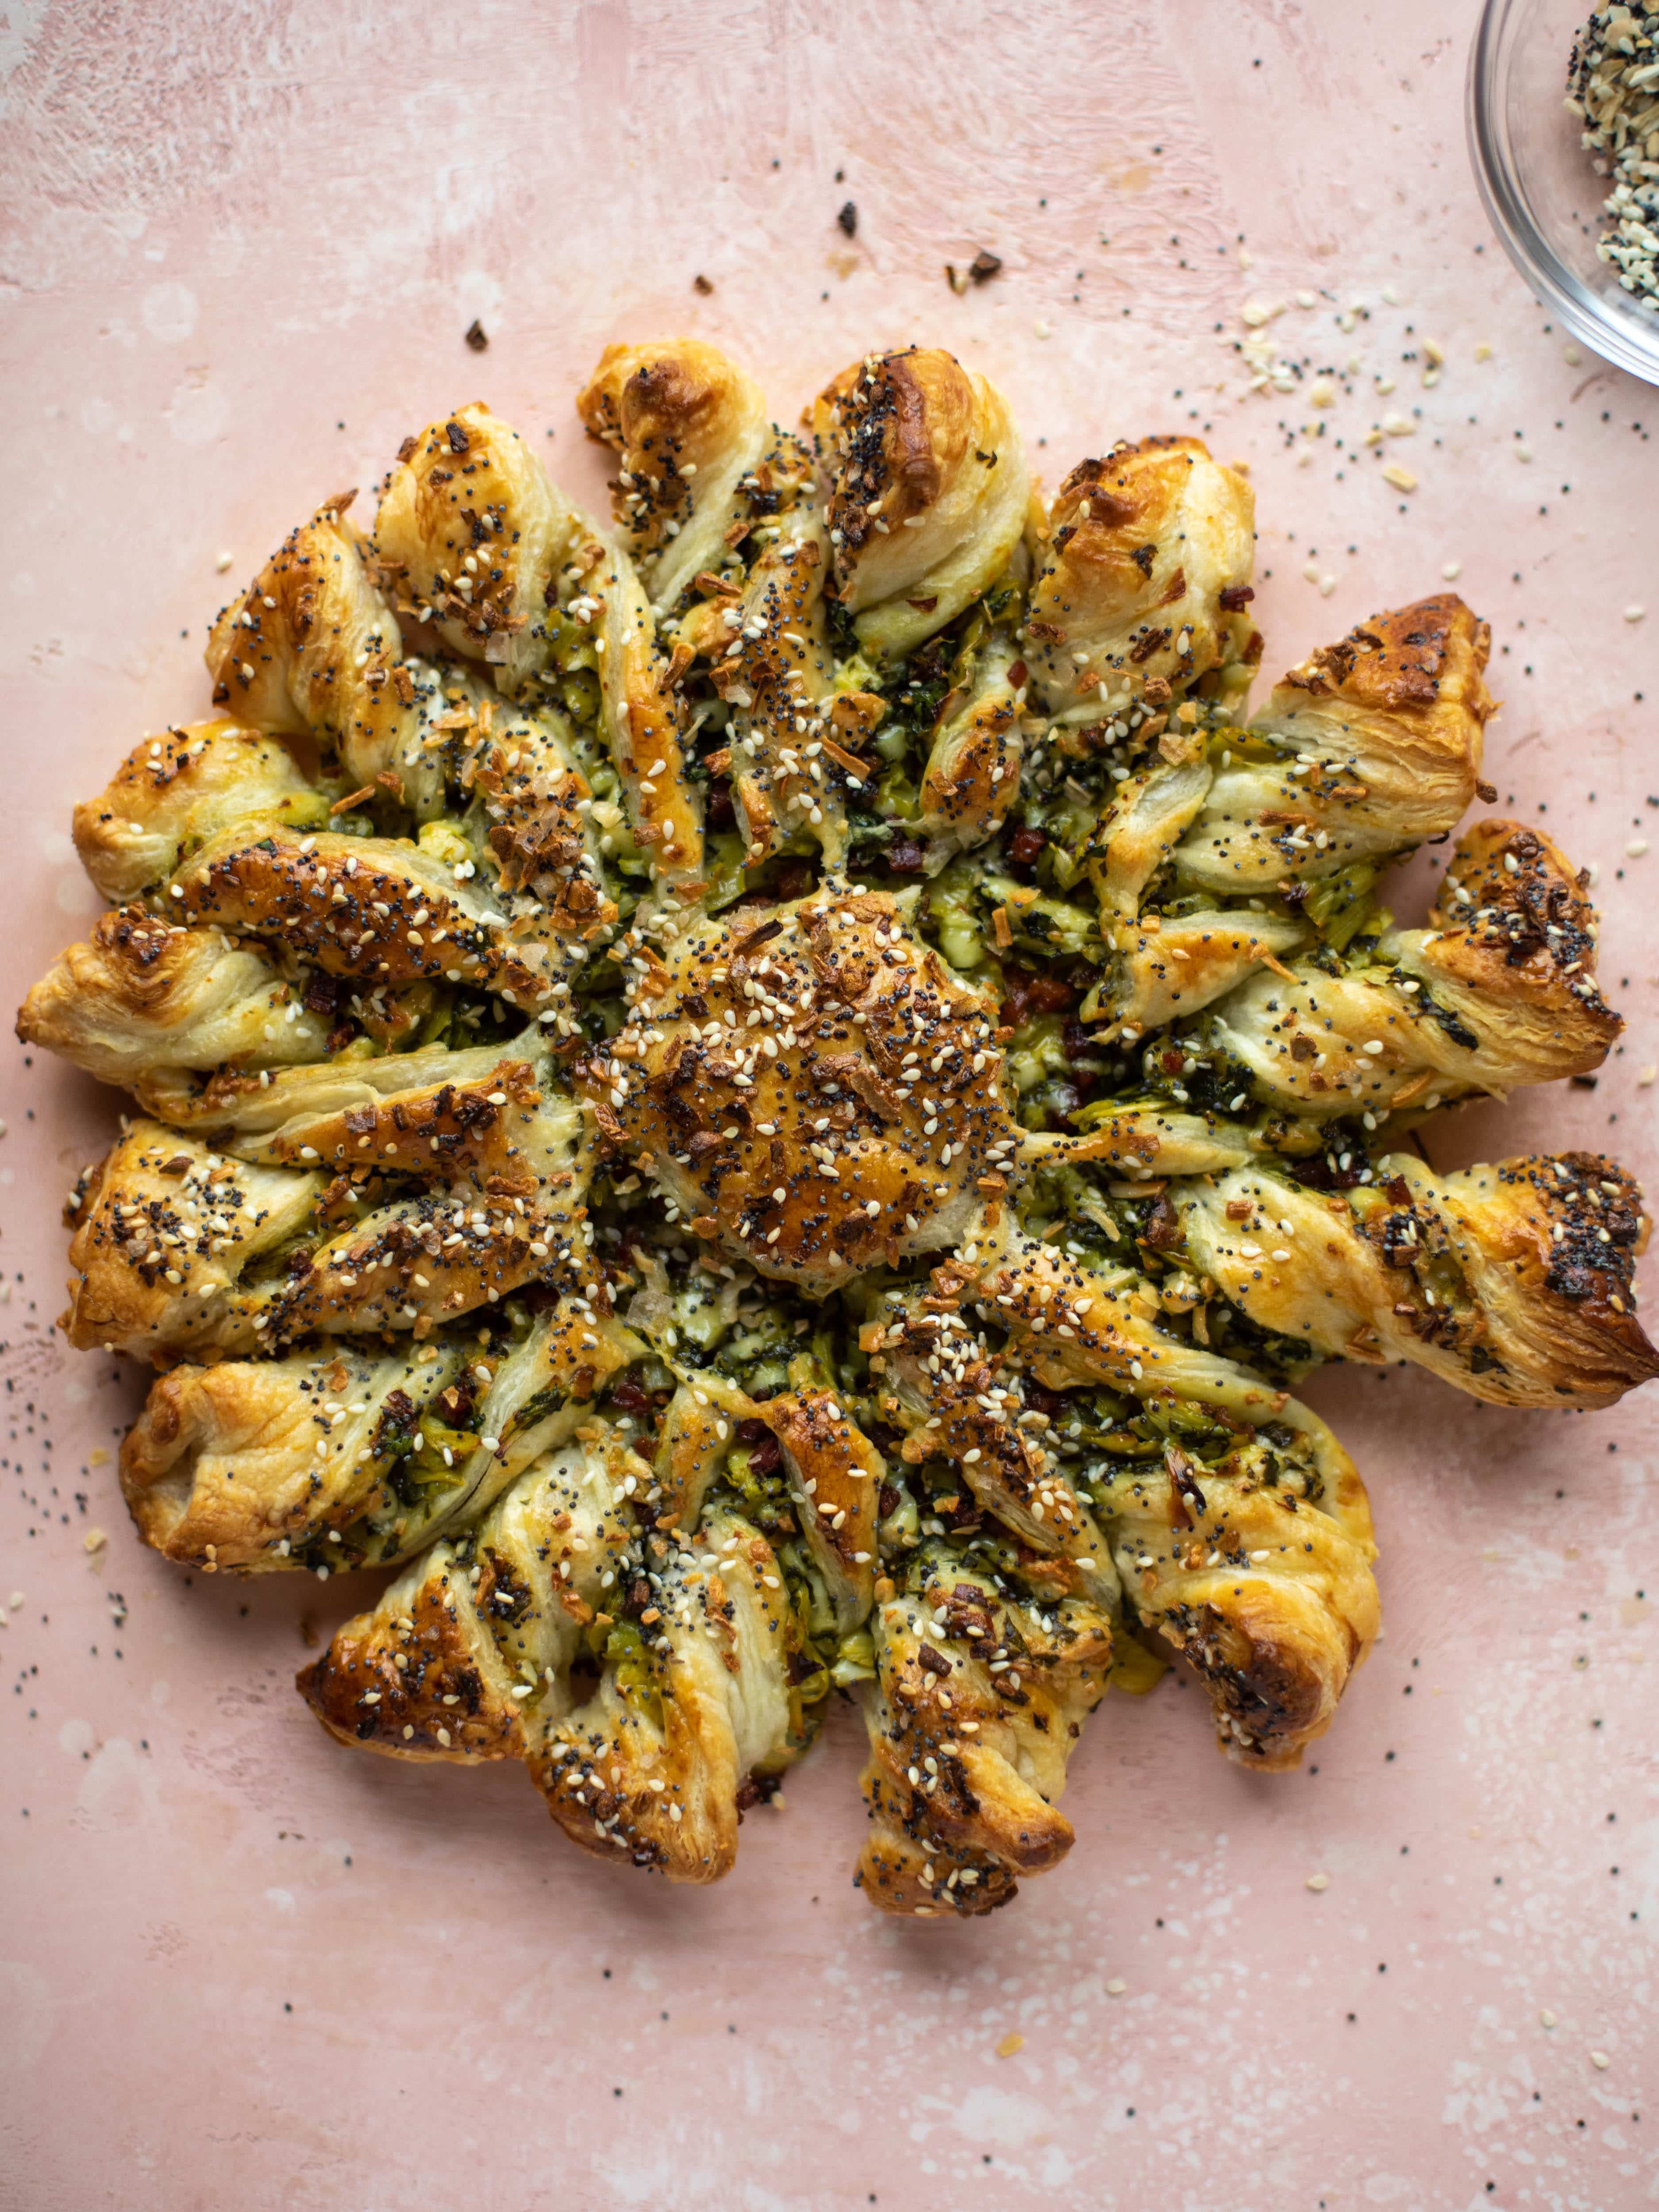 These spinach artichoke twists are filled with cheese and pancetta. They are buttery and flaky on the outside then sprinkled with everything seasoning. YUM.